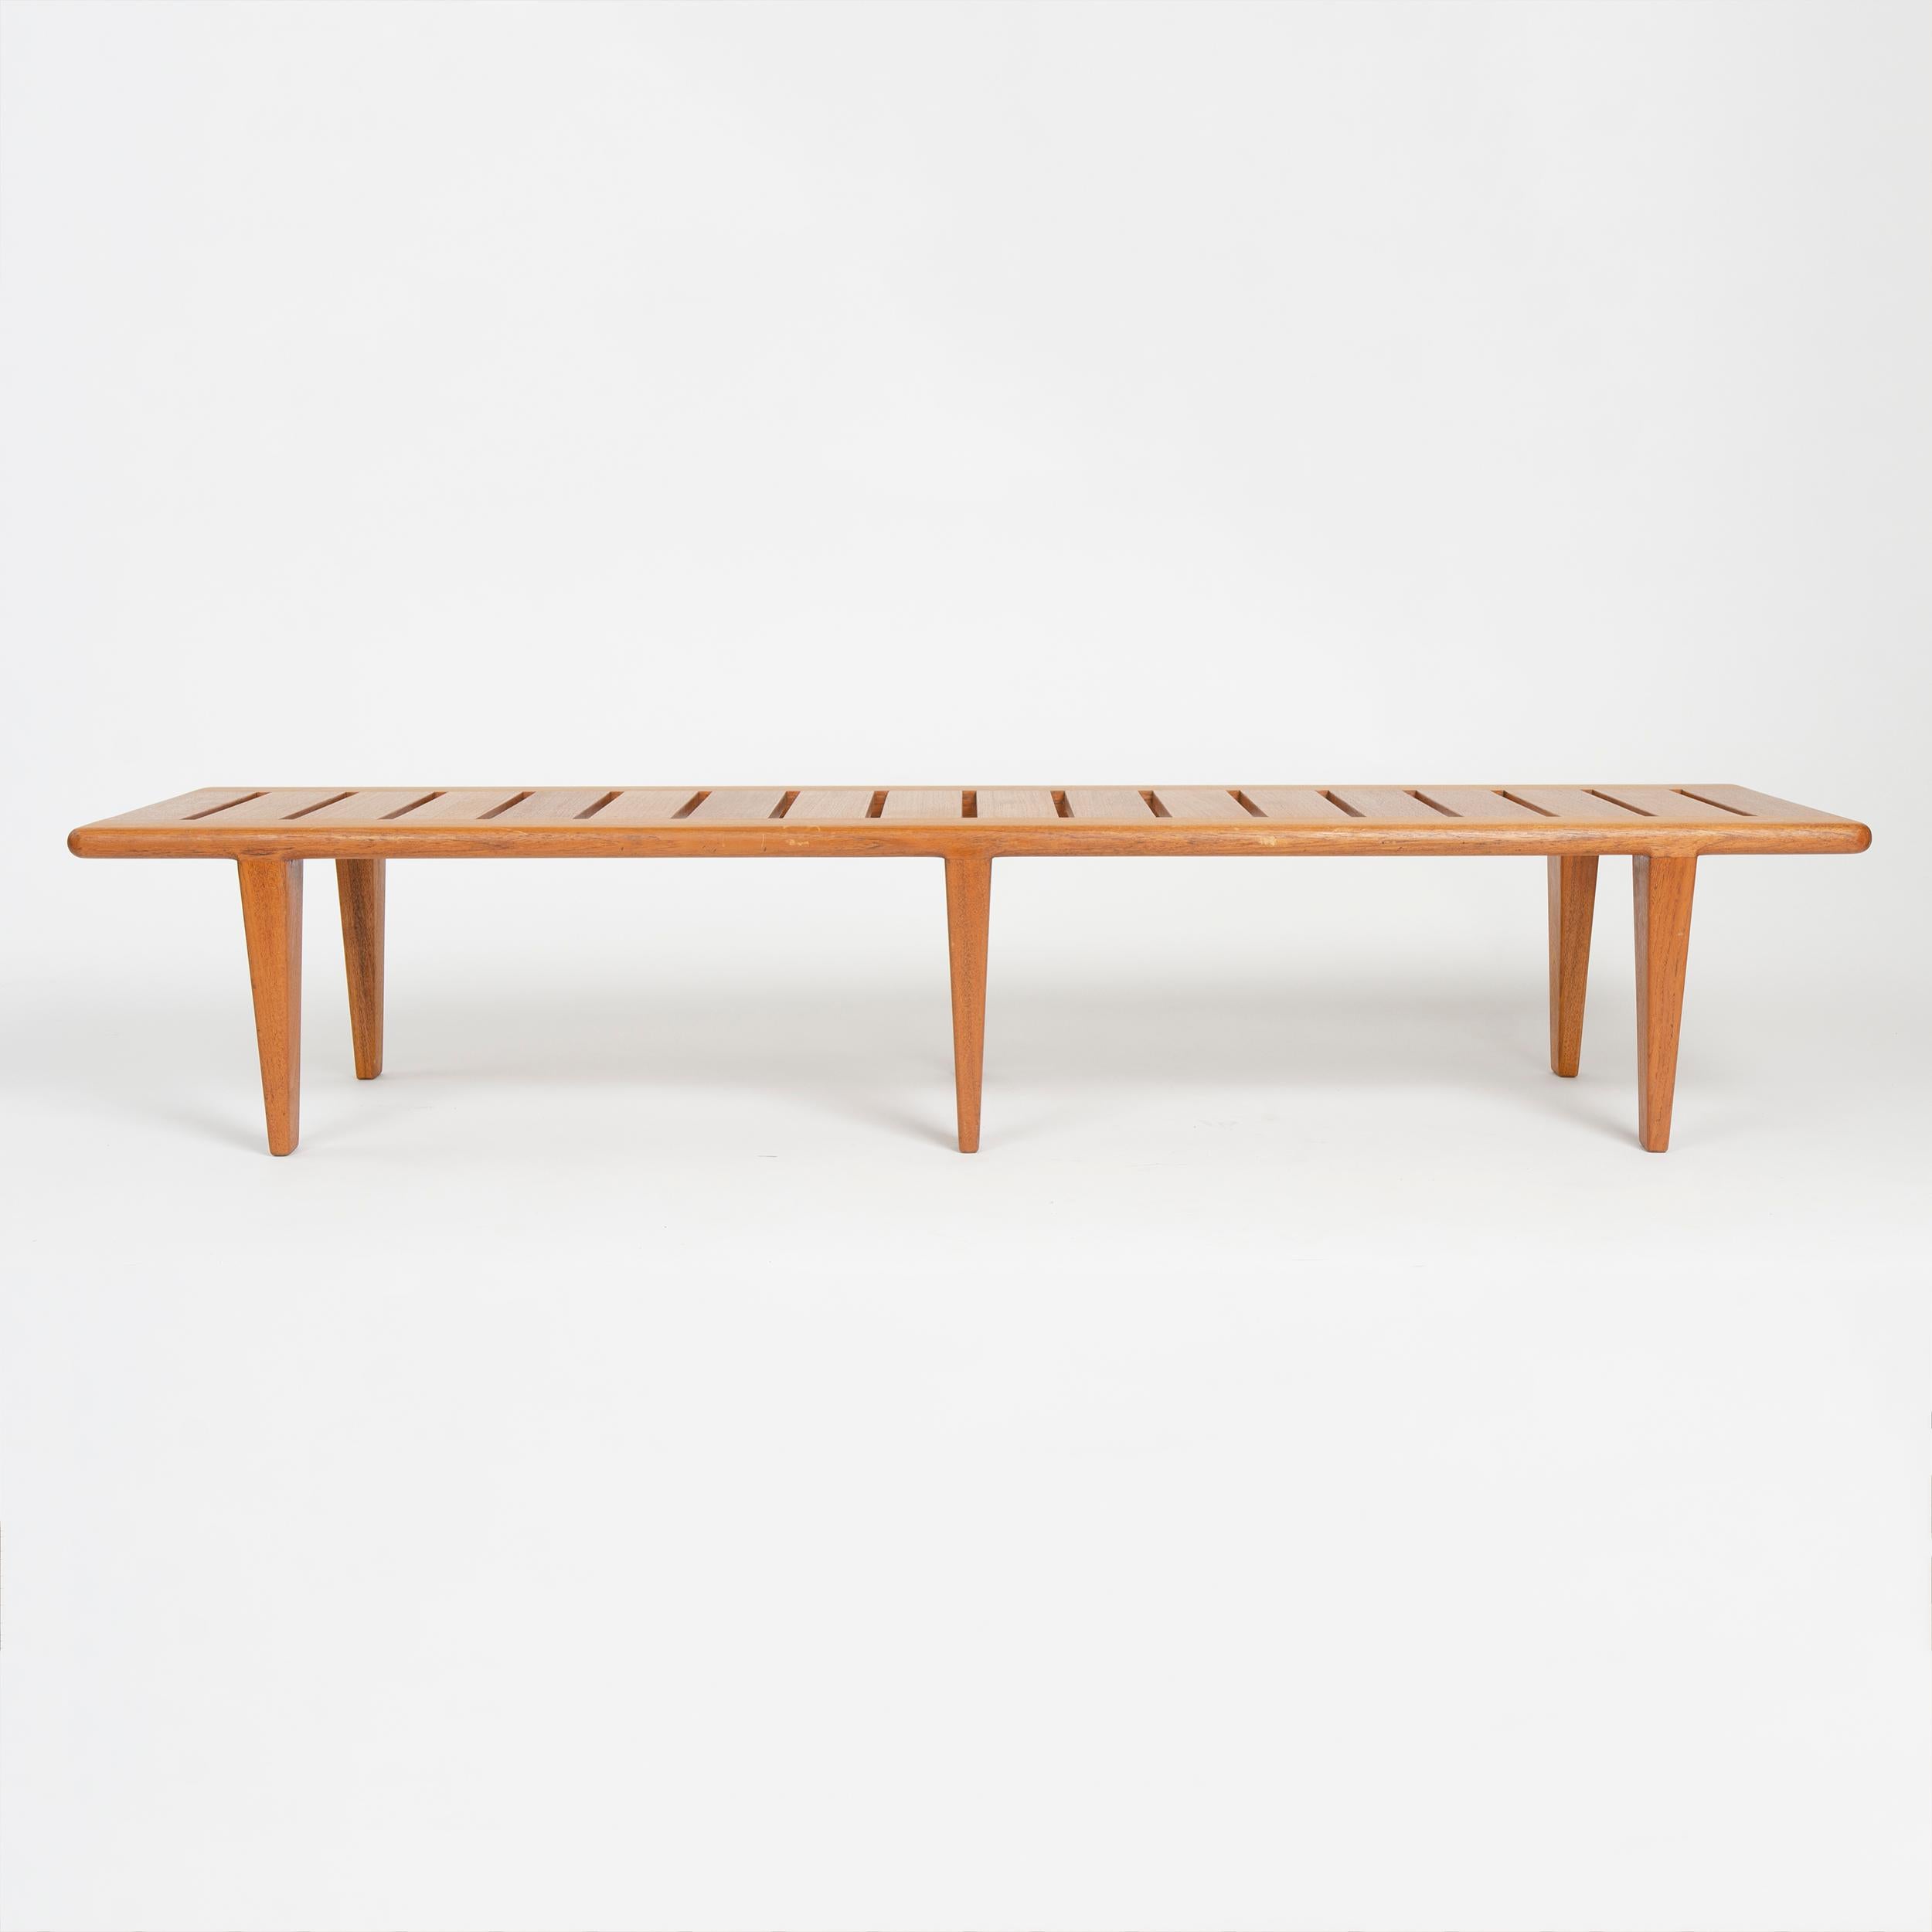 A solid teak bench with a slatted seat over six (6) tapered legs.